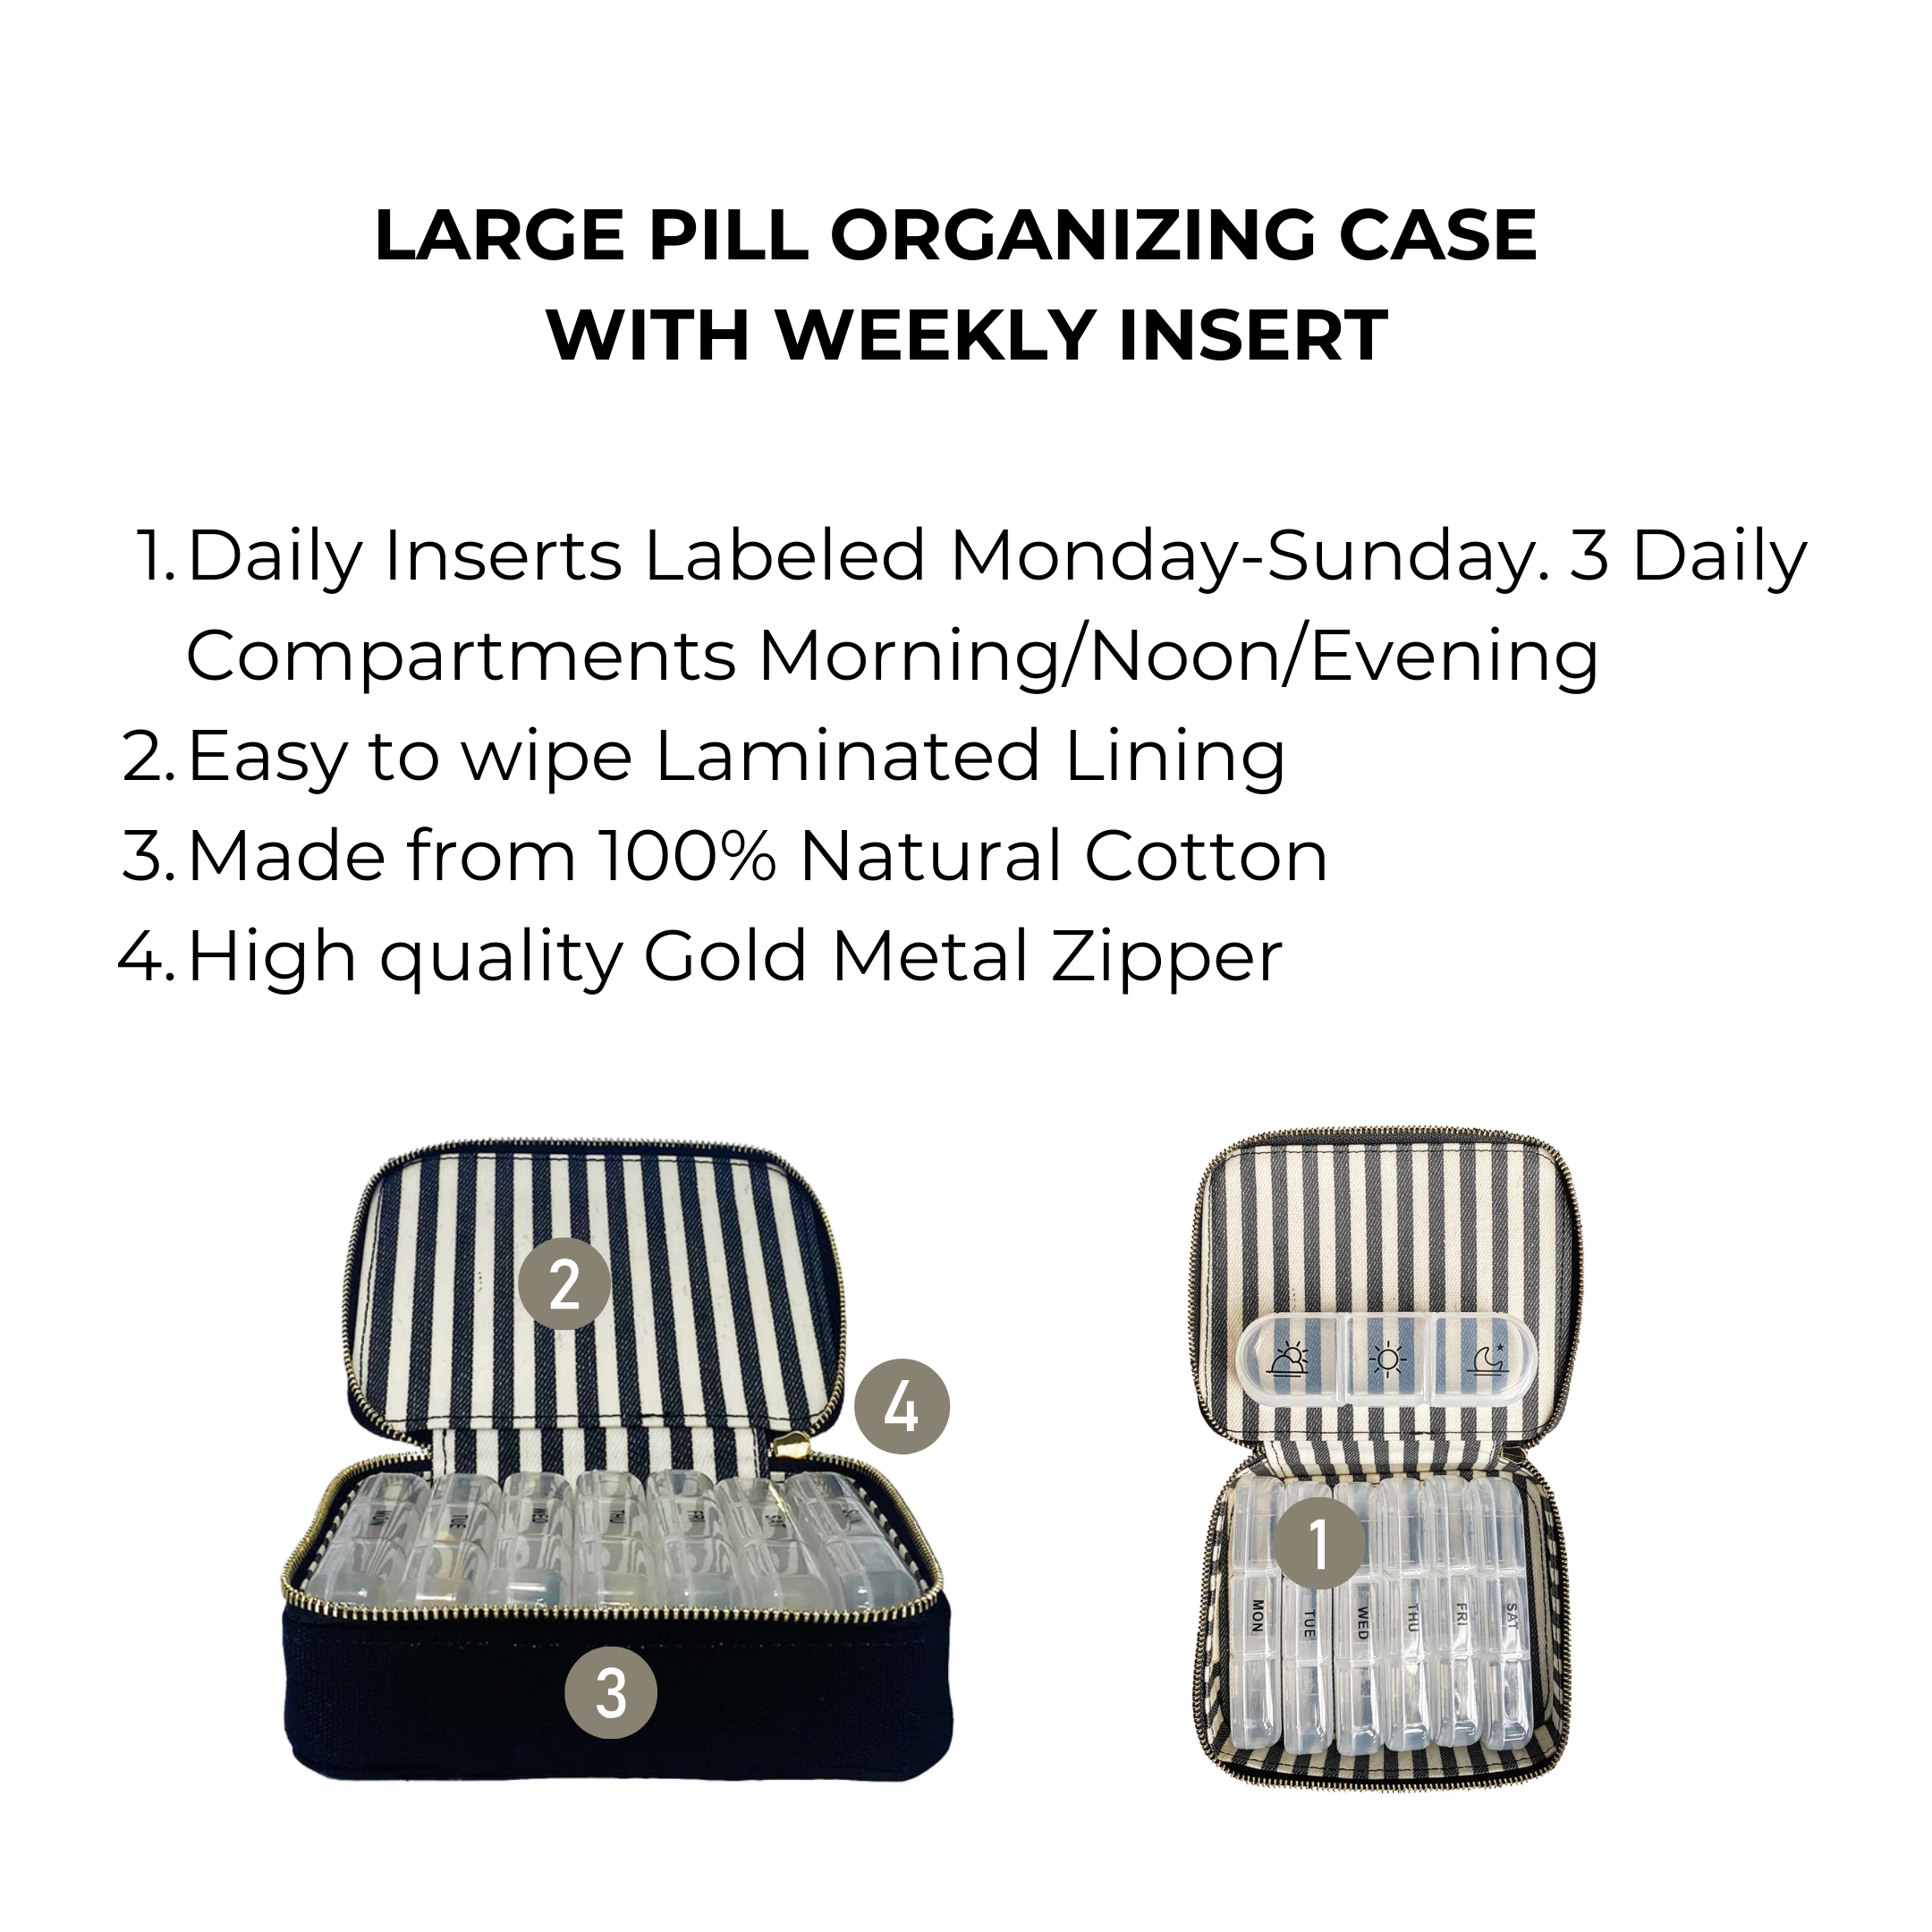 Large Pill Organizing Case with Weekly Insert, Black | Bag-all